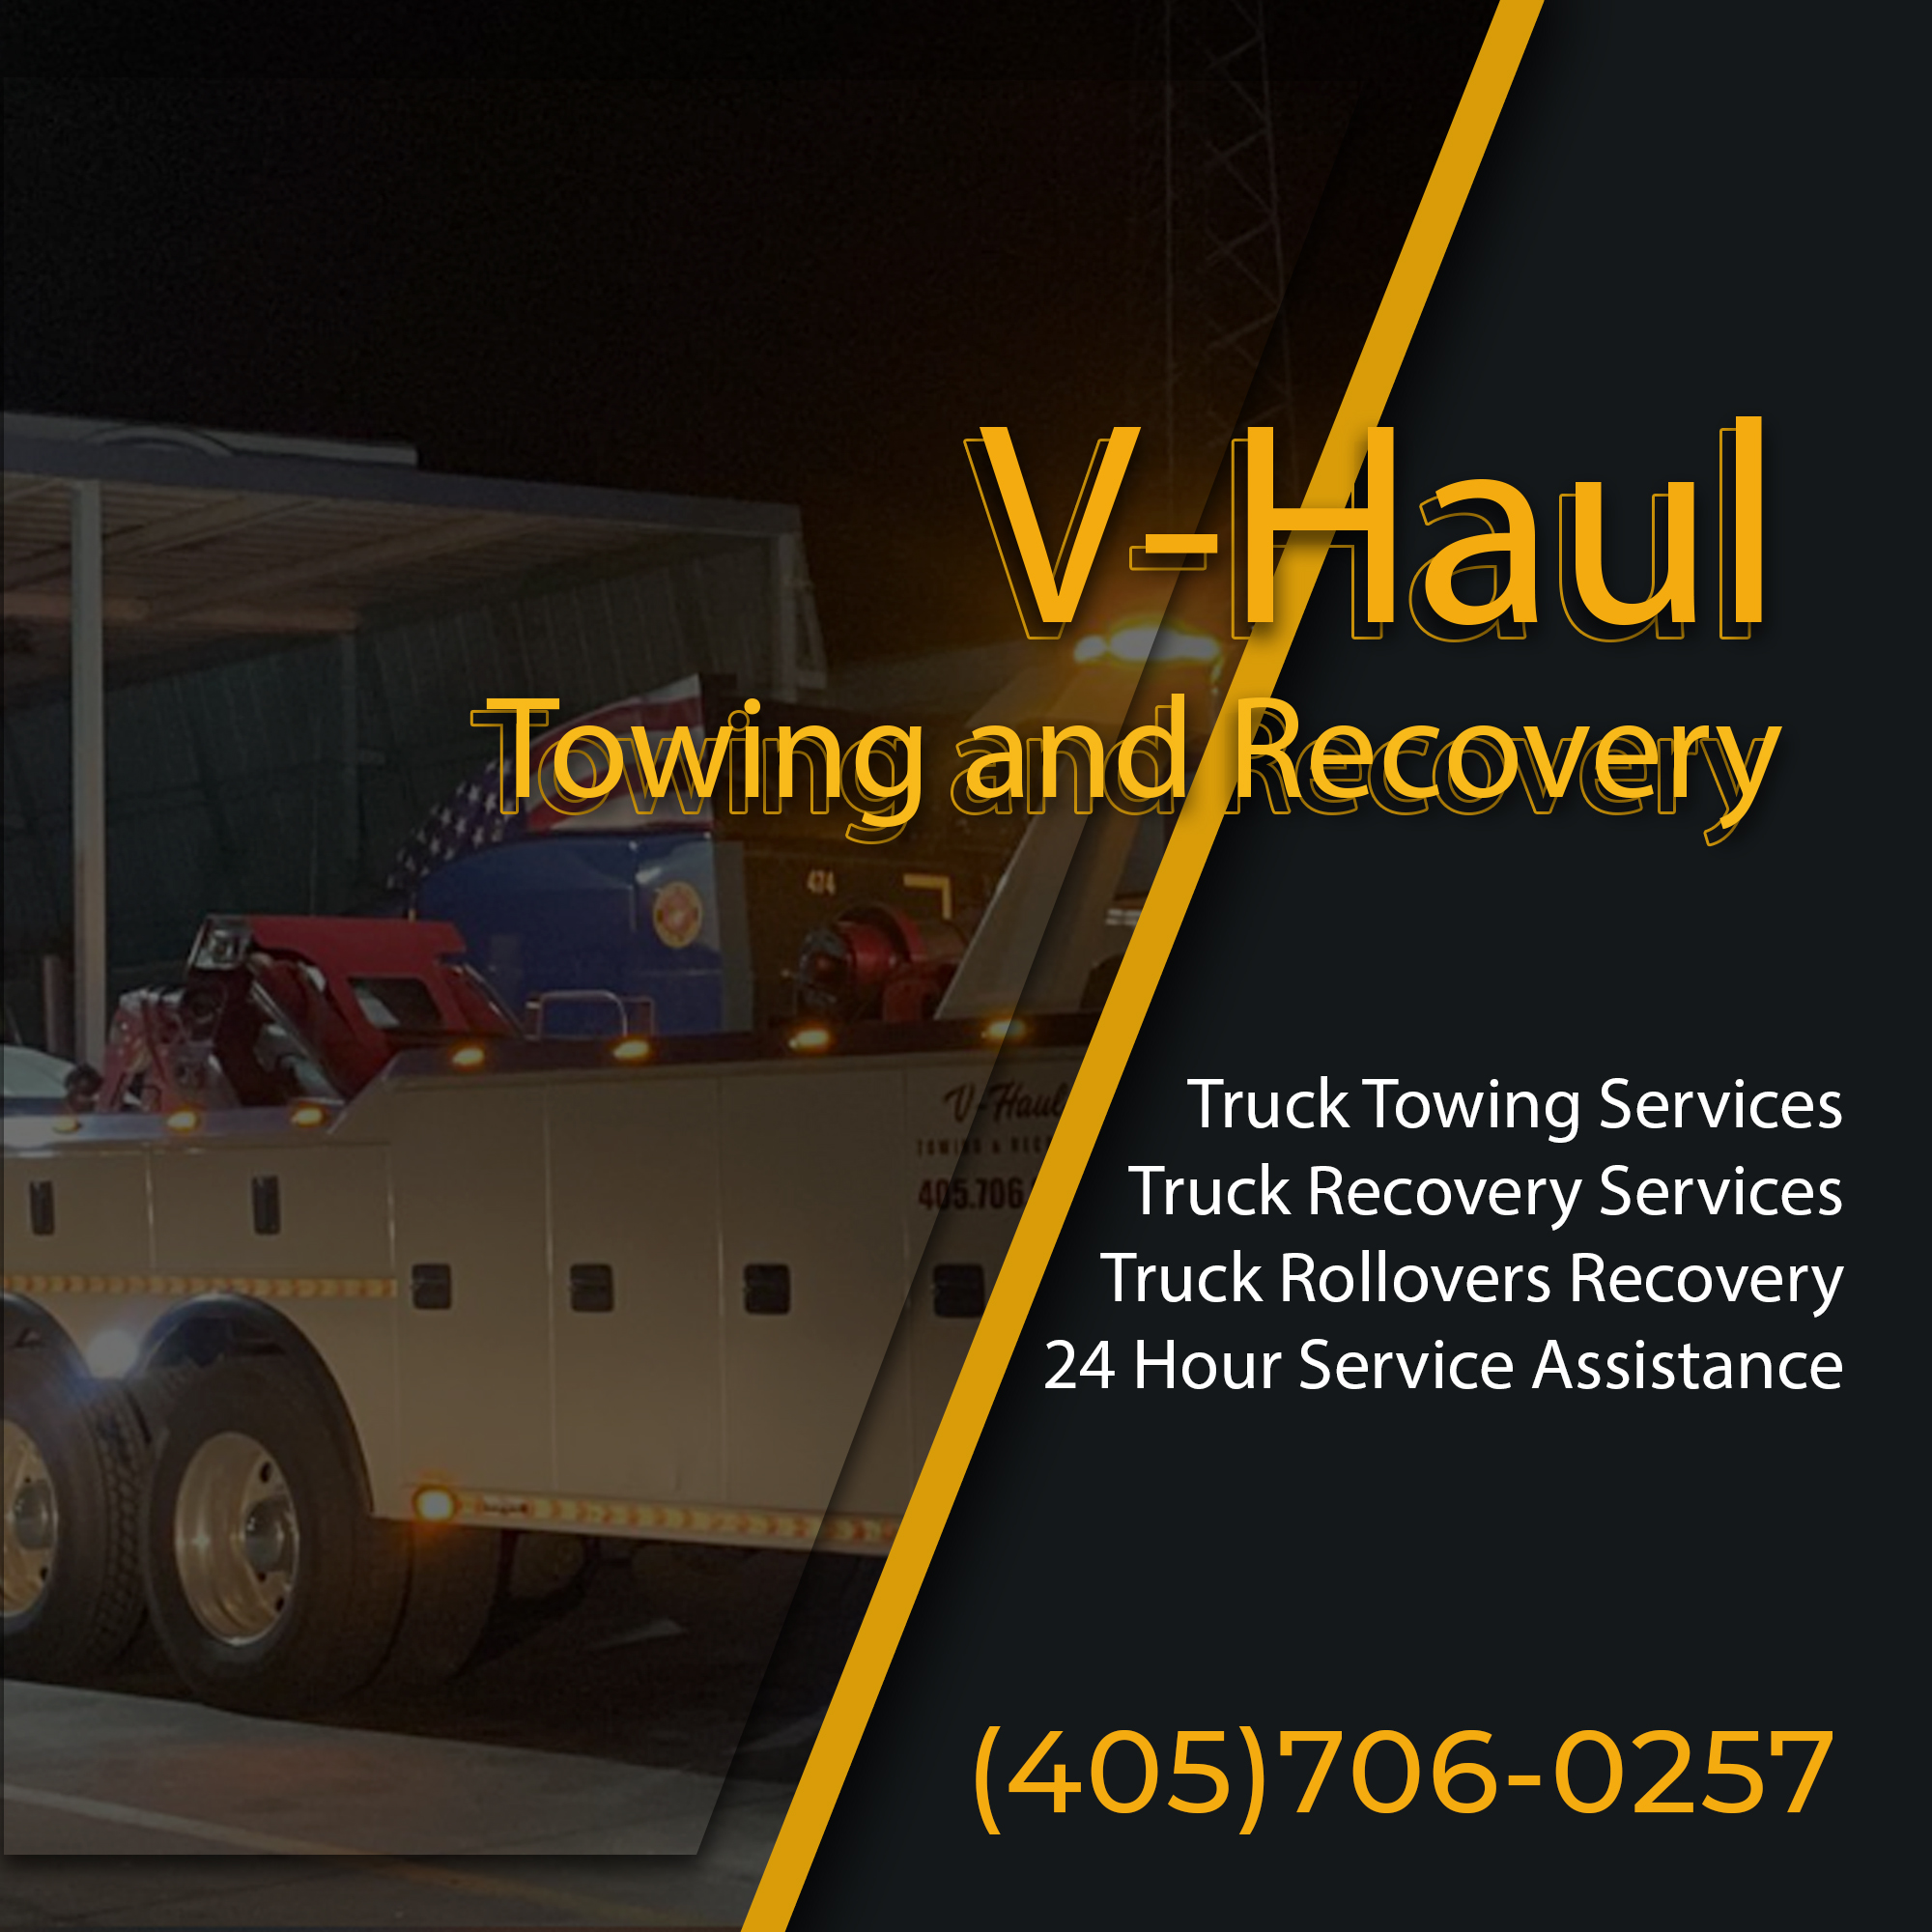 V-Haul Towing and Recovery